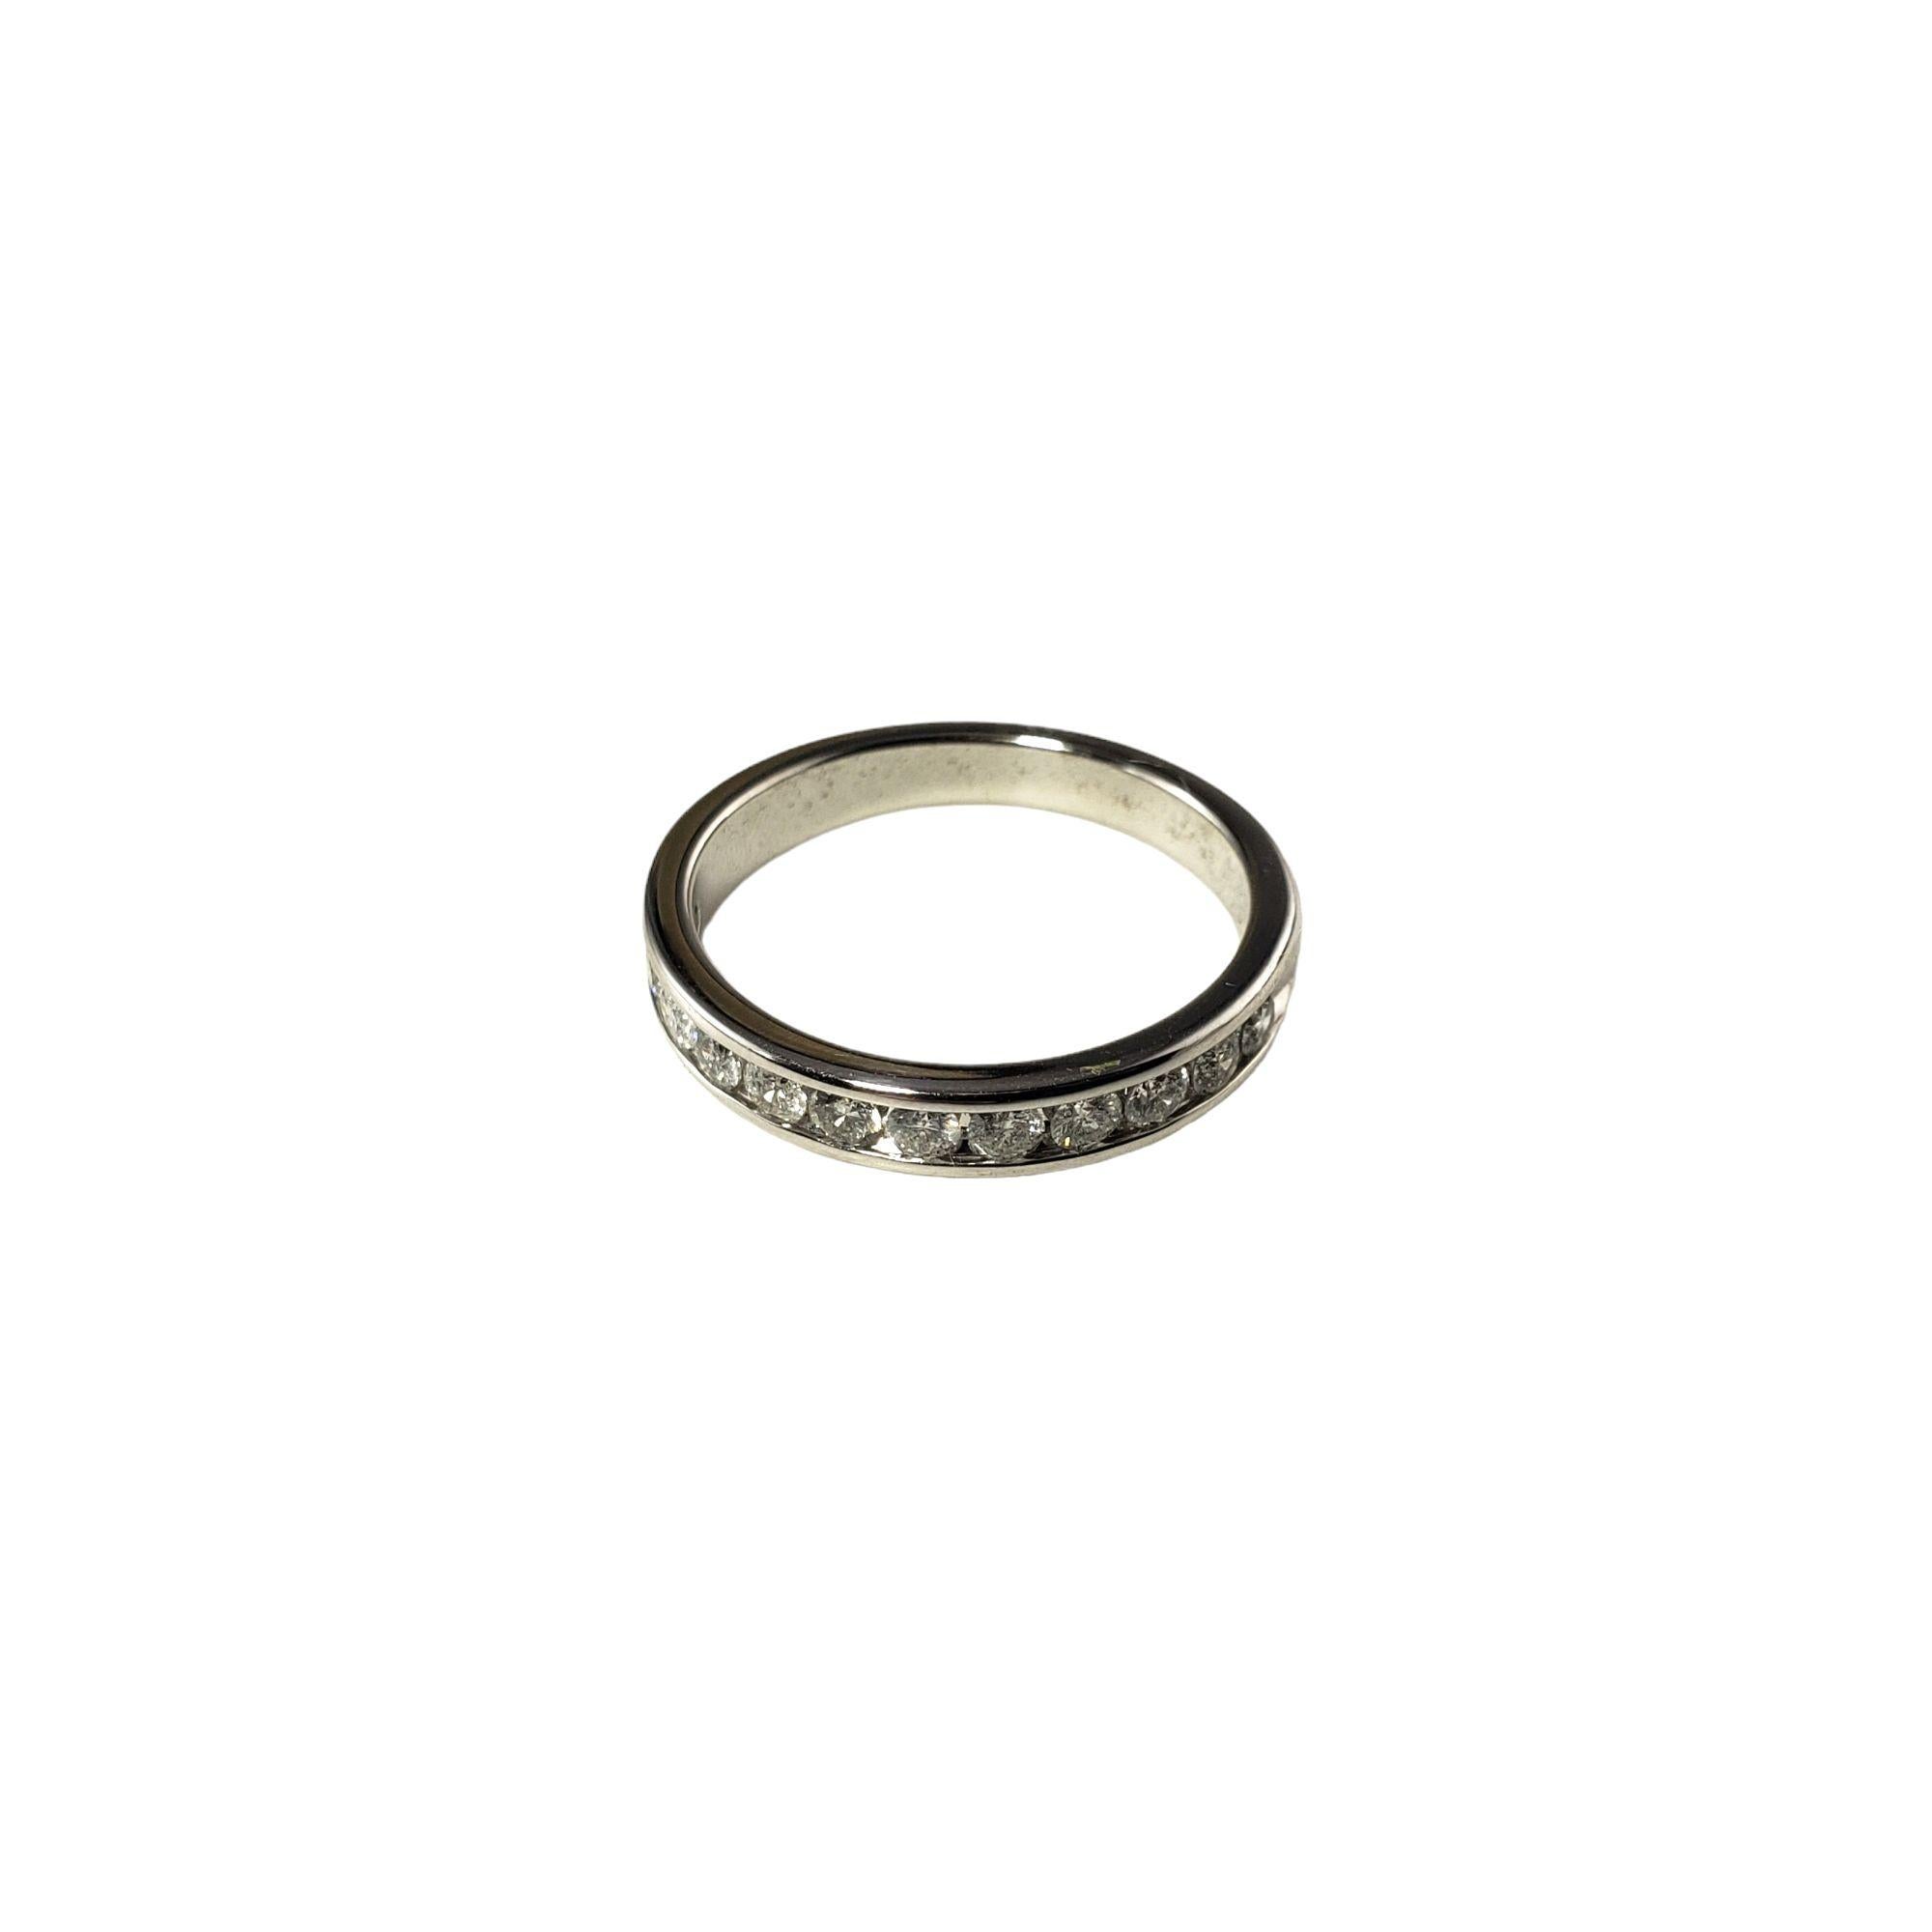 Vintage 10 Karat White Gold and Diamond Wedding Band Ring Size -

This sparkling band features 12 round brilliant cut diamonds set in classic 10K white gold. Width: 3 mm.

Approximate total diamond weight: .60 ct.

Diamond color: I

Diamond clarity: